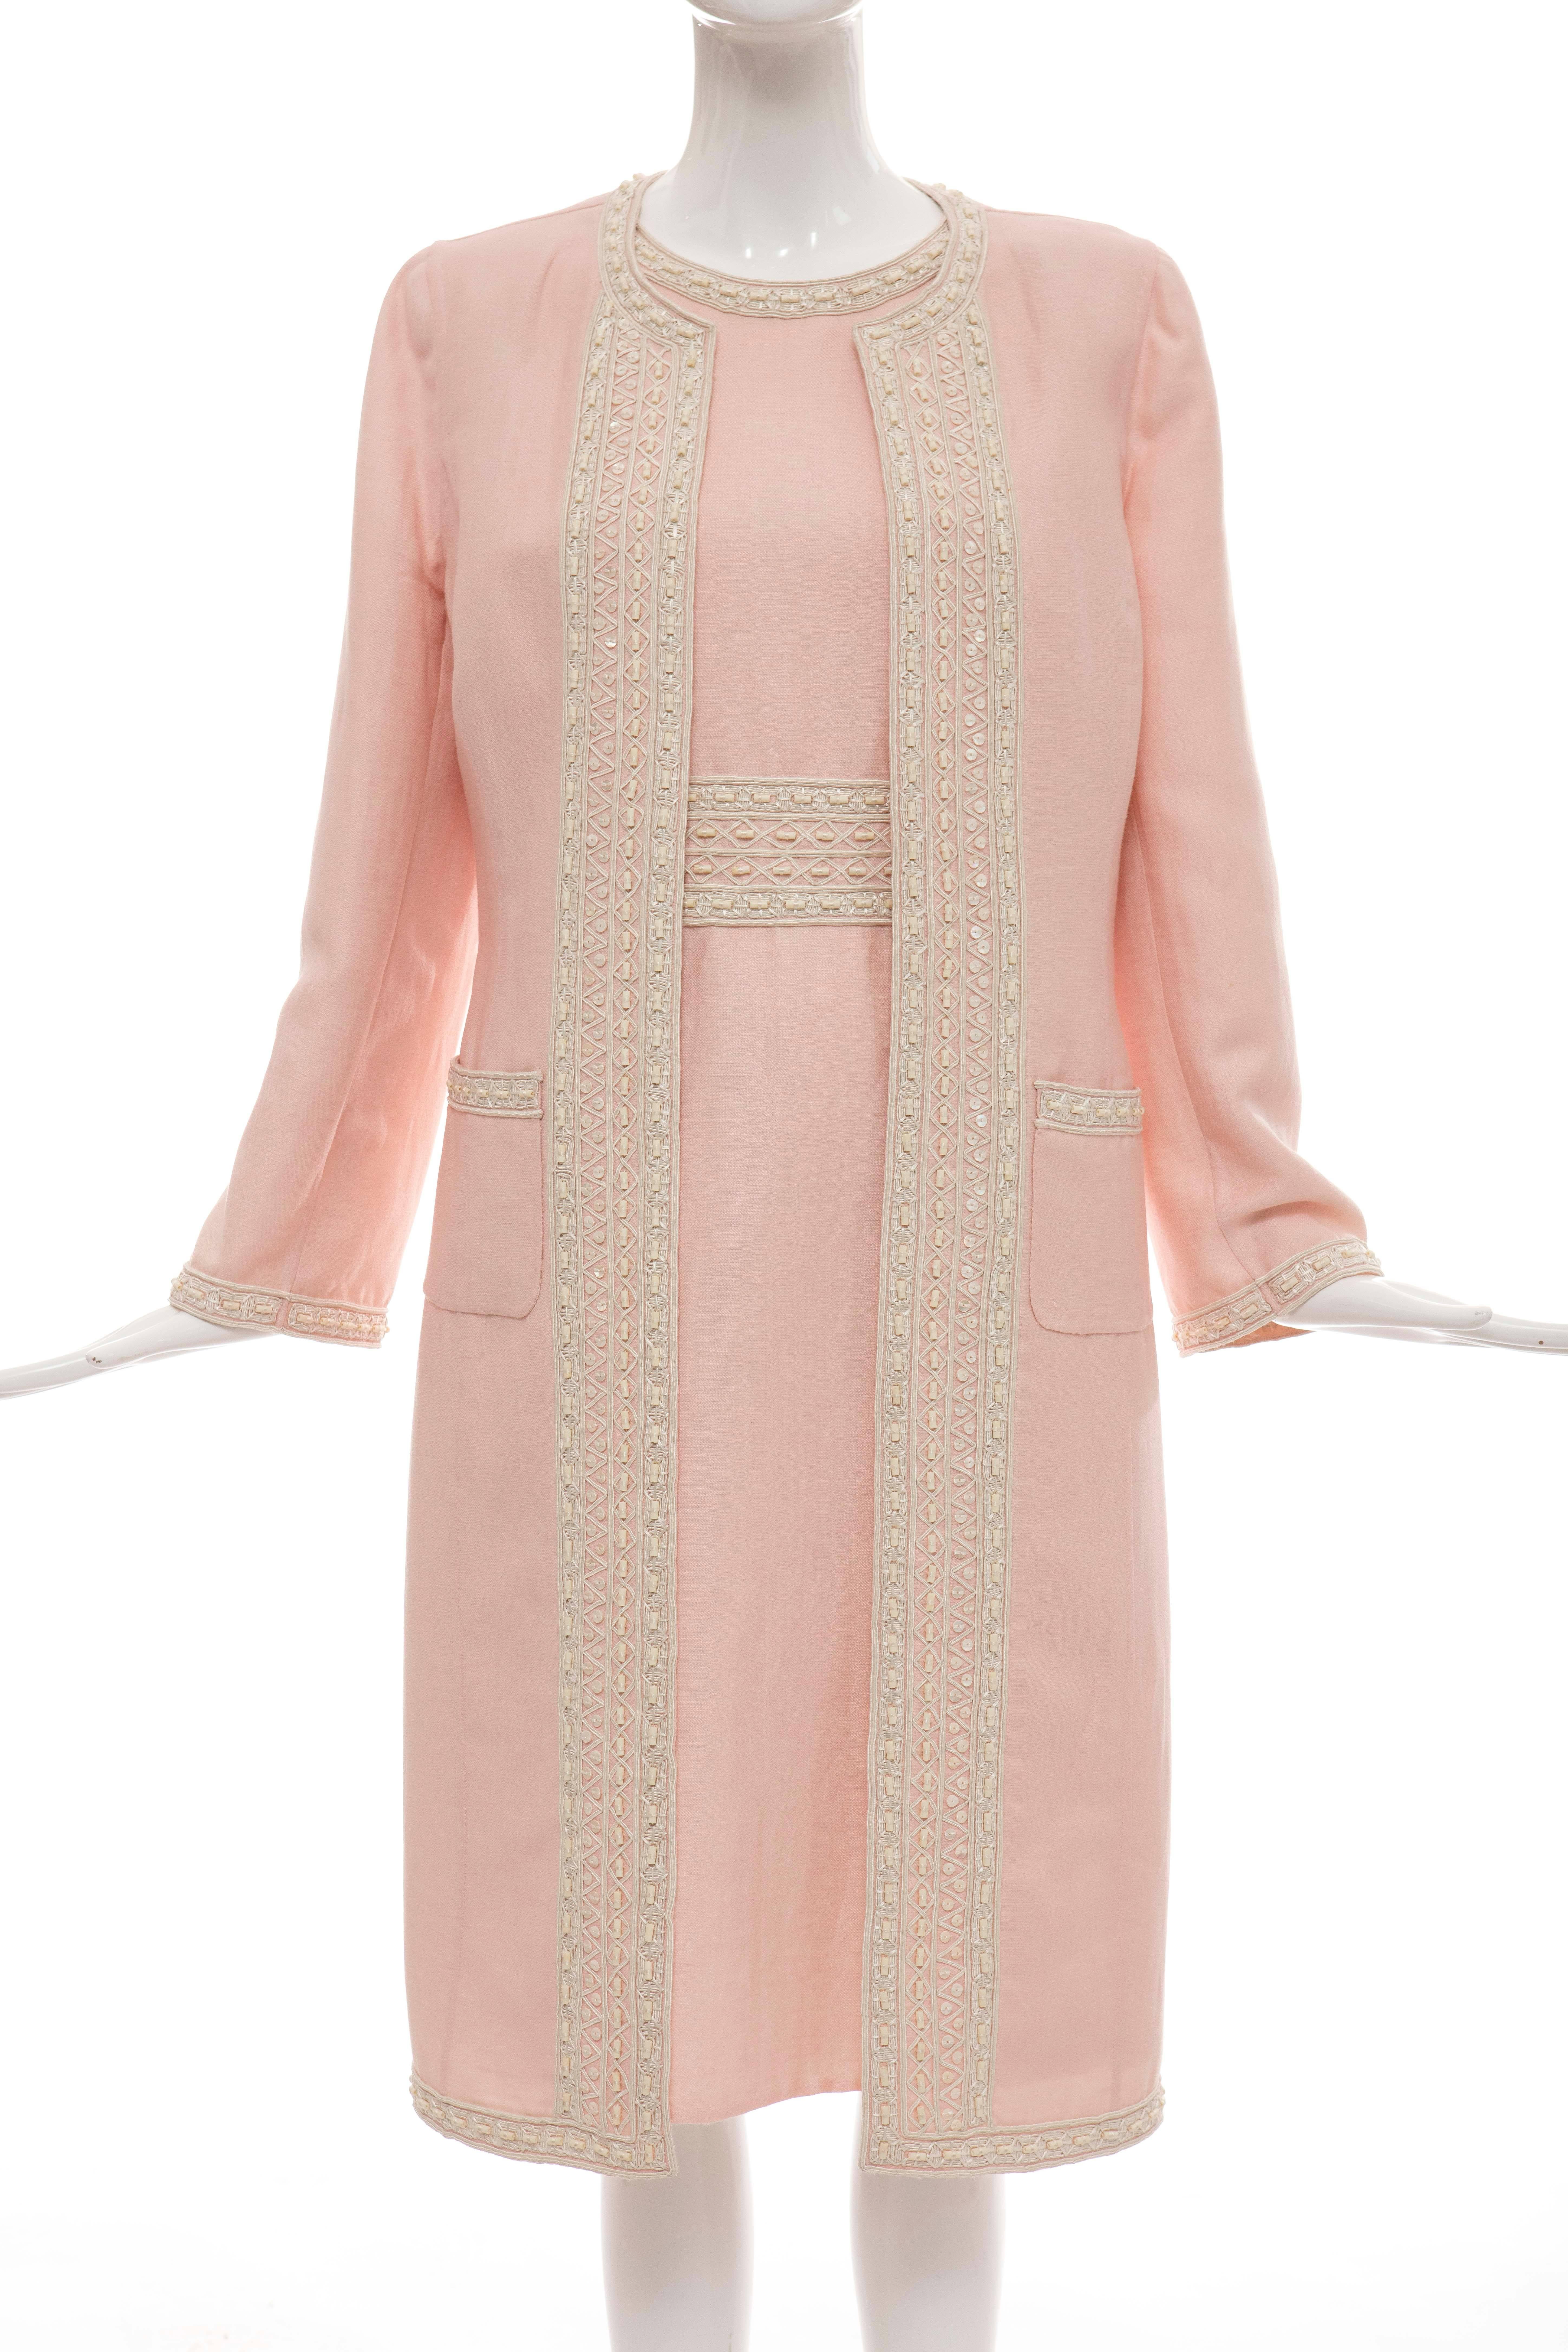 Oscar De la Renta, Resort 2006 pink wool linen cotton dress ensemble. Sleeveless embroidered dress with back zip with hook and eye closure. Embroidered coat with two front pockets.

Dress US. 10

Coat US. 8

Dress: Bust 36, Waist 30, Hips 40, Length